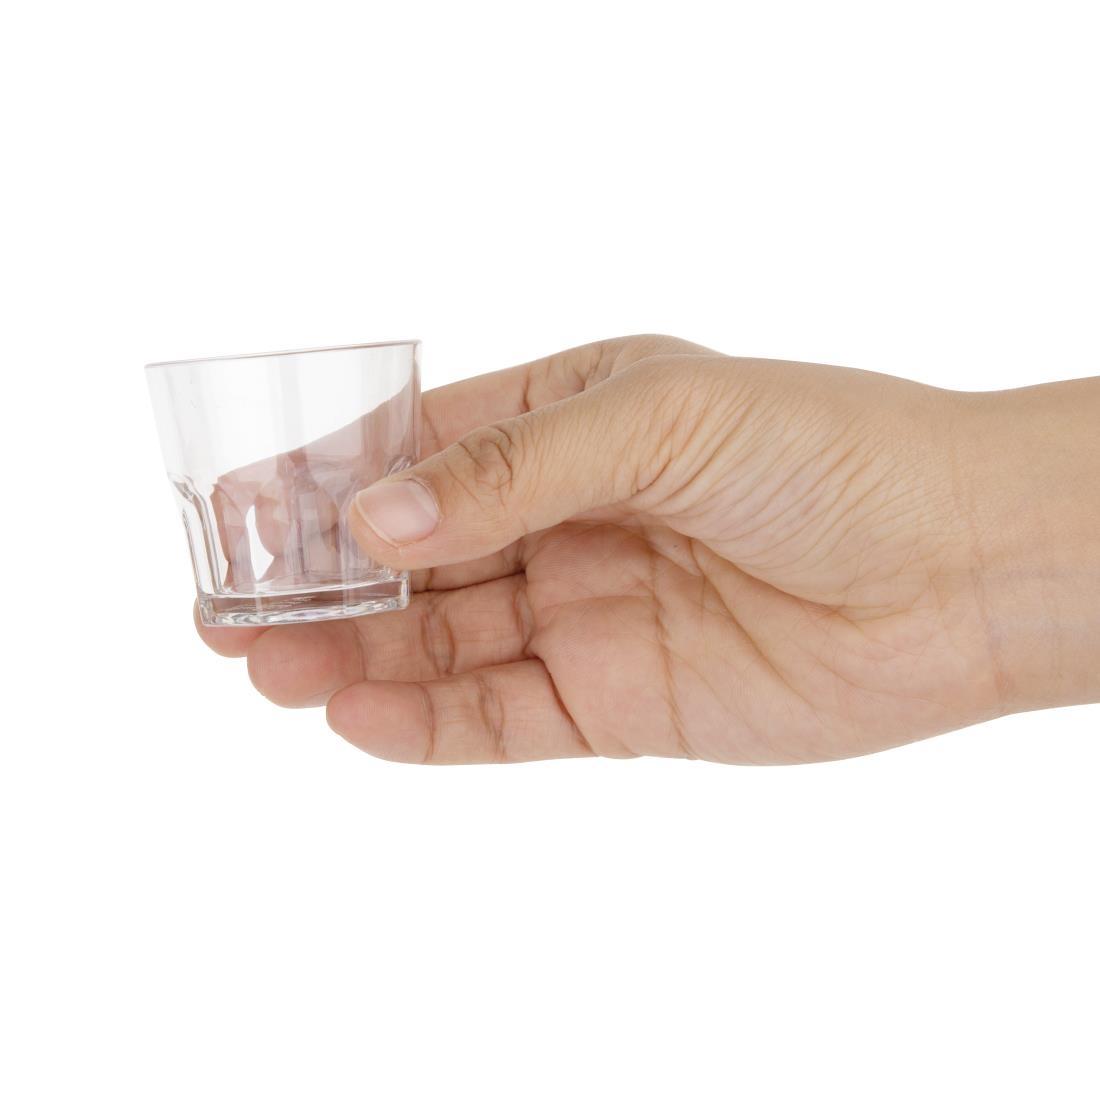 Olympia Kristallon Orleans Shot Glasses 40ml (Pack of 12) - DY794  - 2